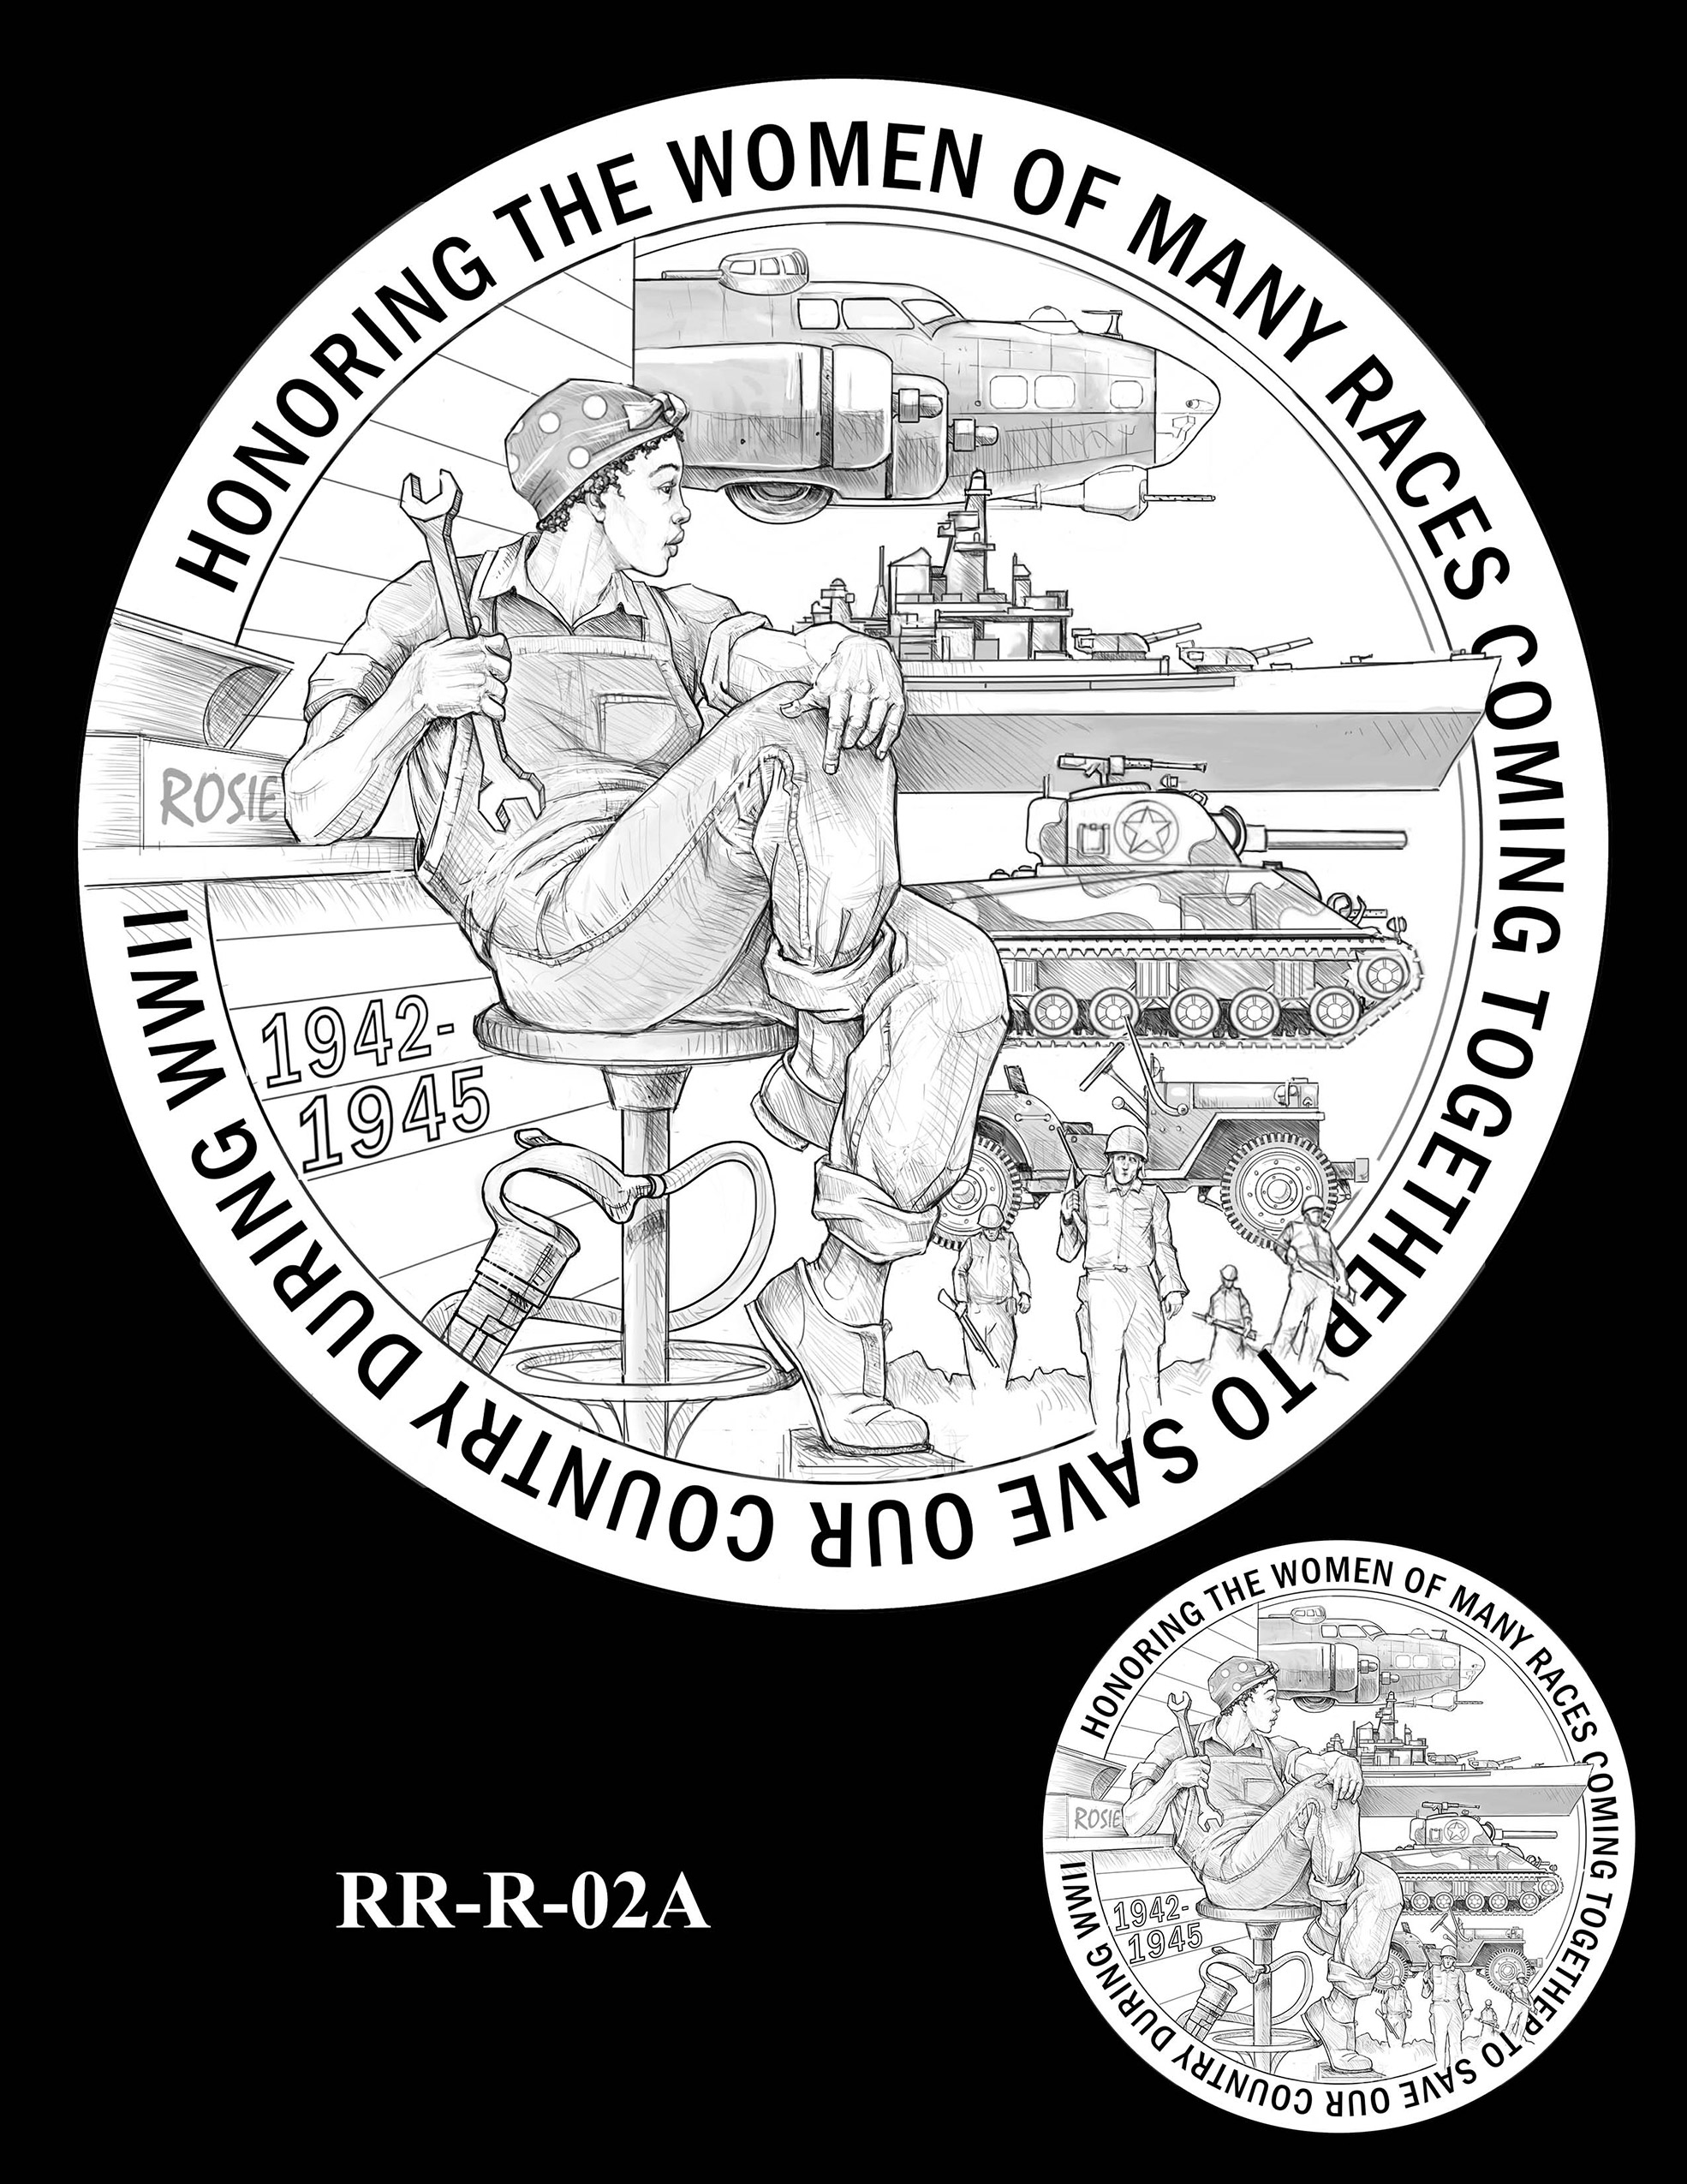 RR-R-02A -- Rosie the Riveter Congressional Gold Medal